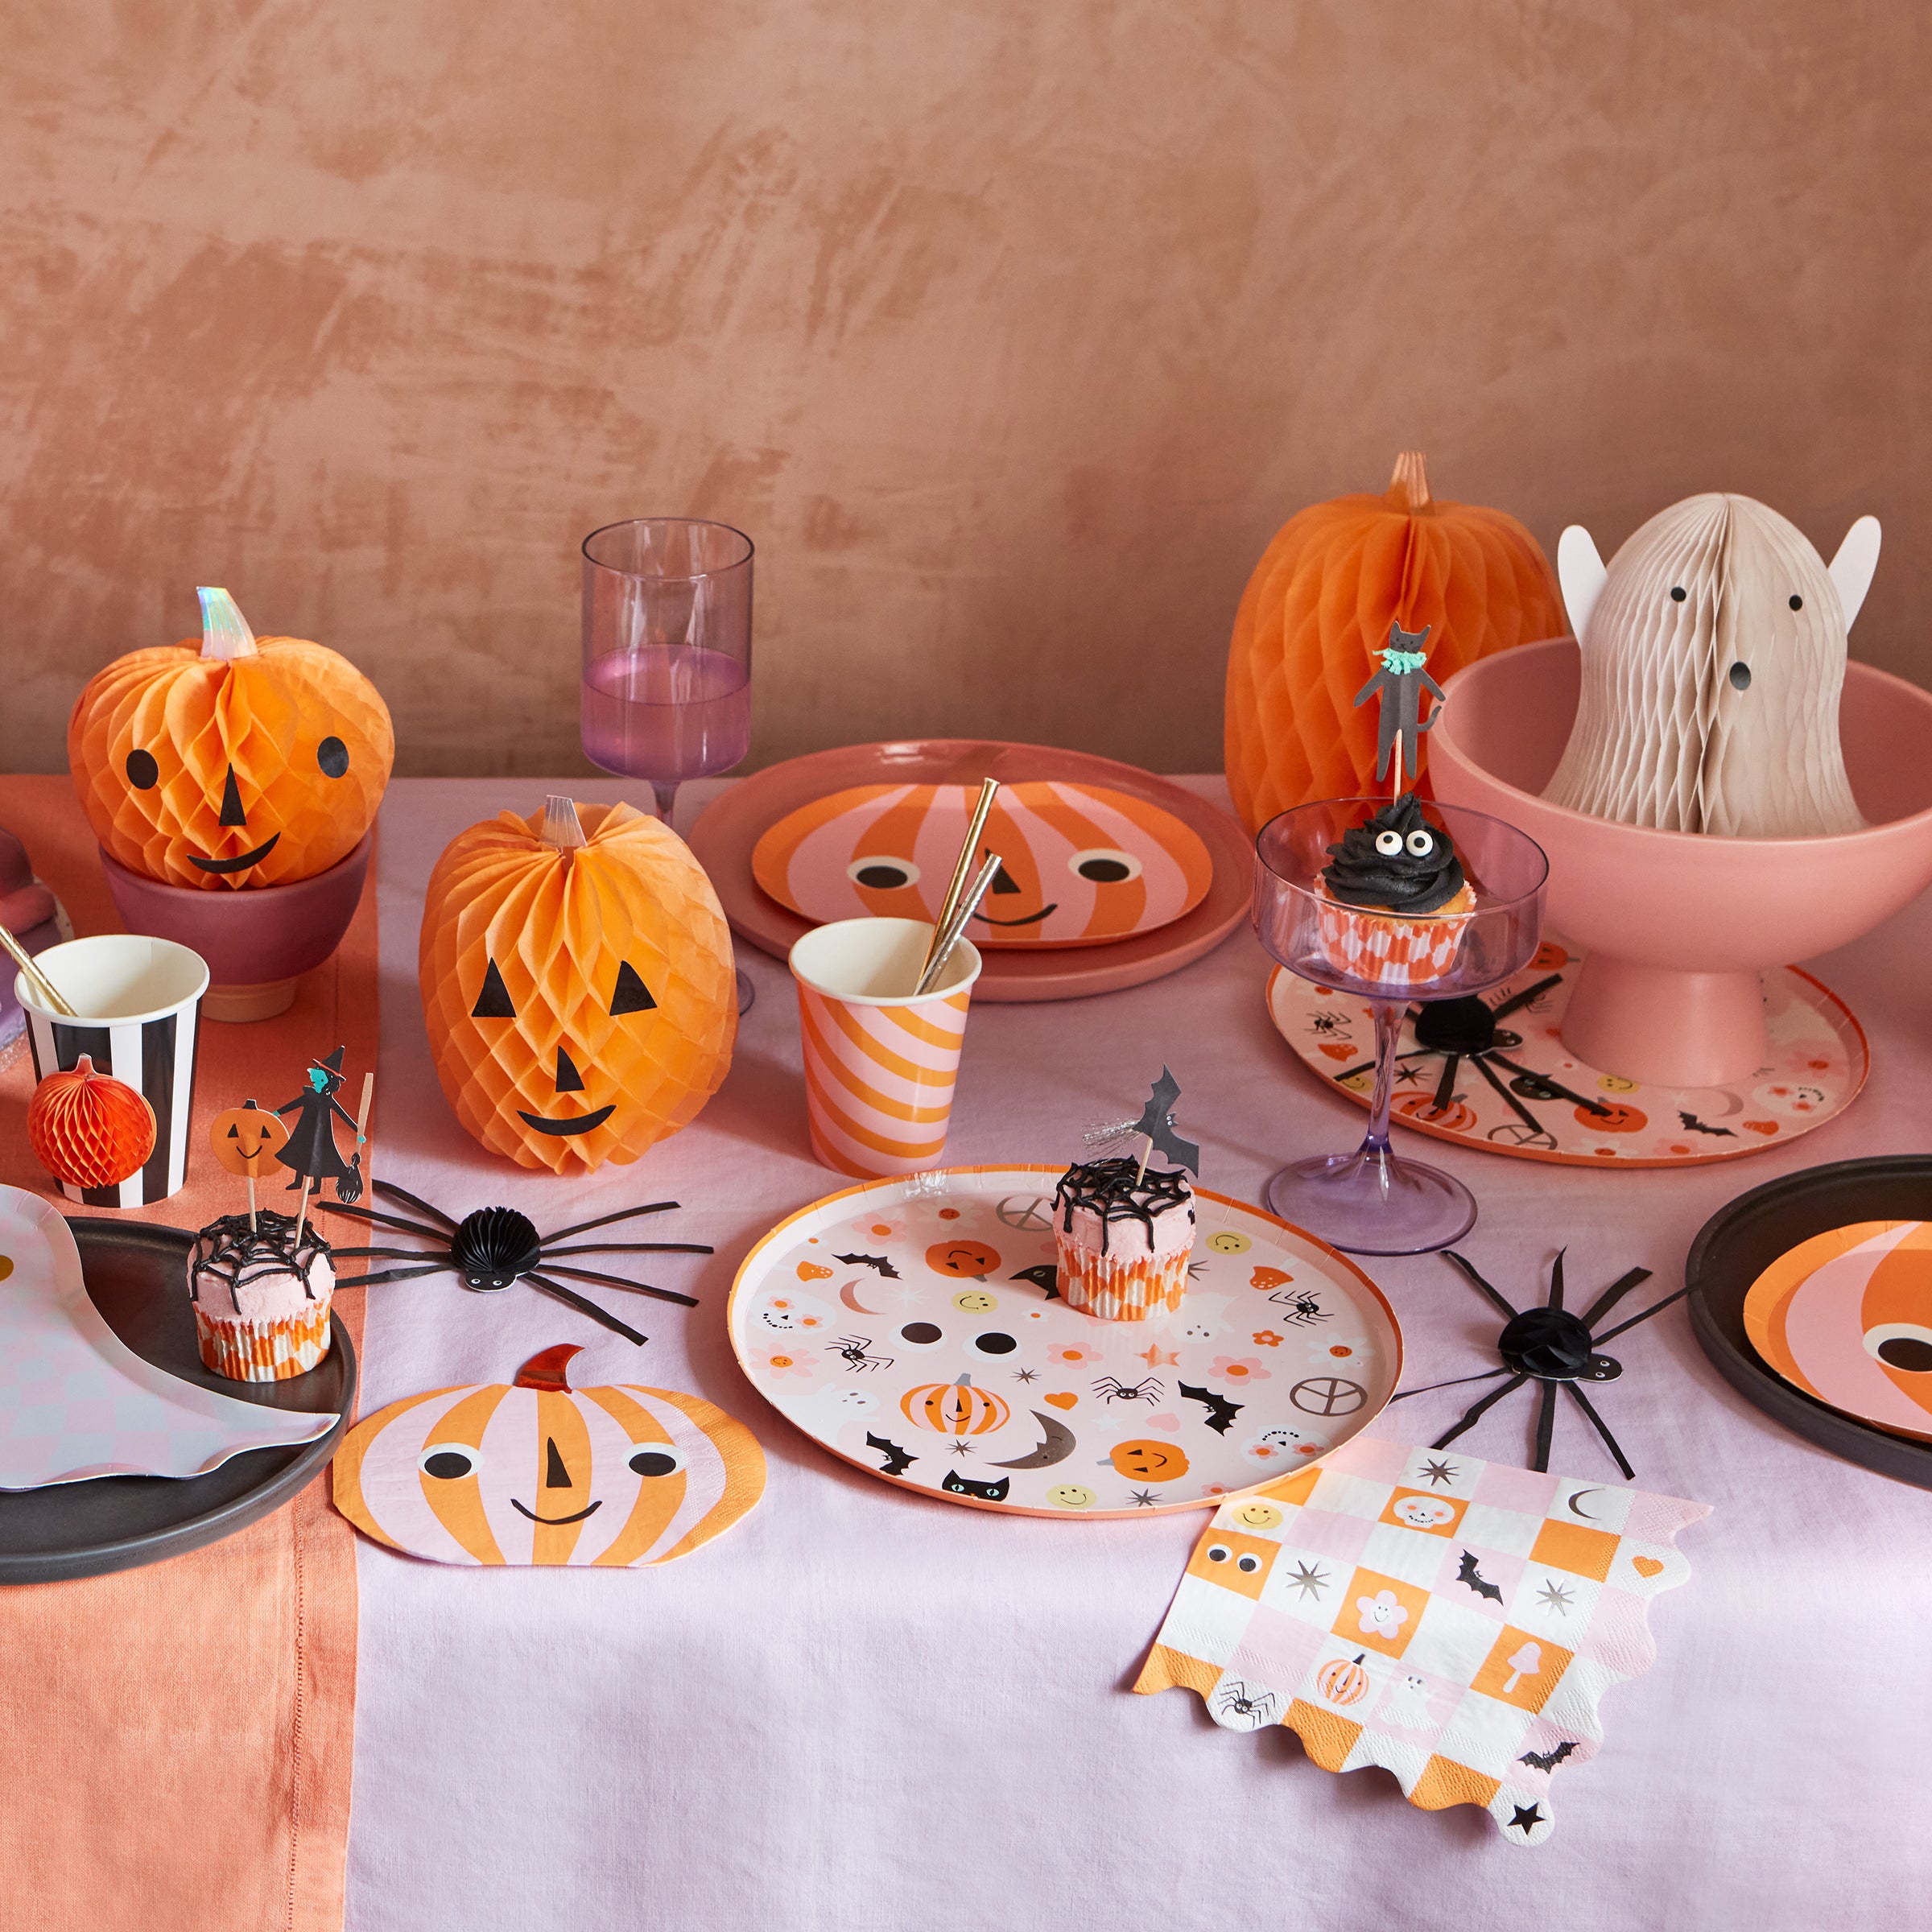 Our party plates, with happy Halloween illustrations, are perfect if you're looking for Halloween party ideas.